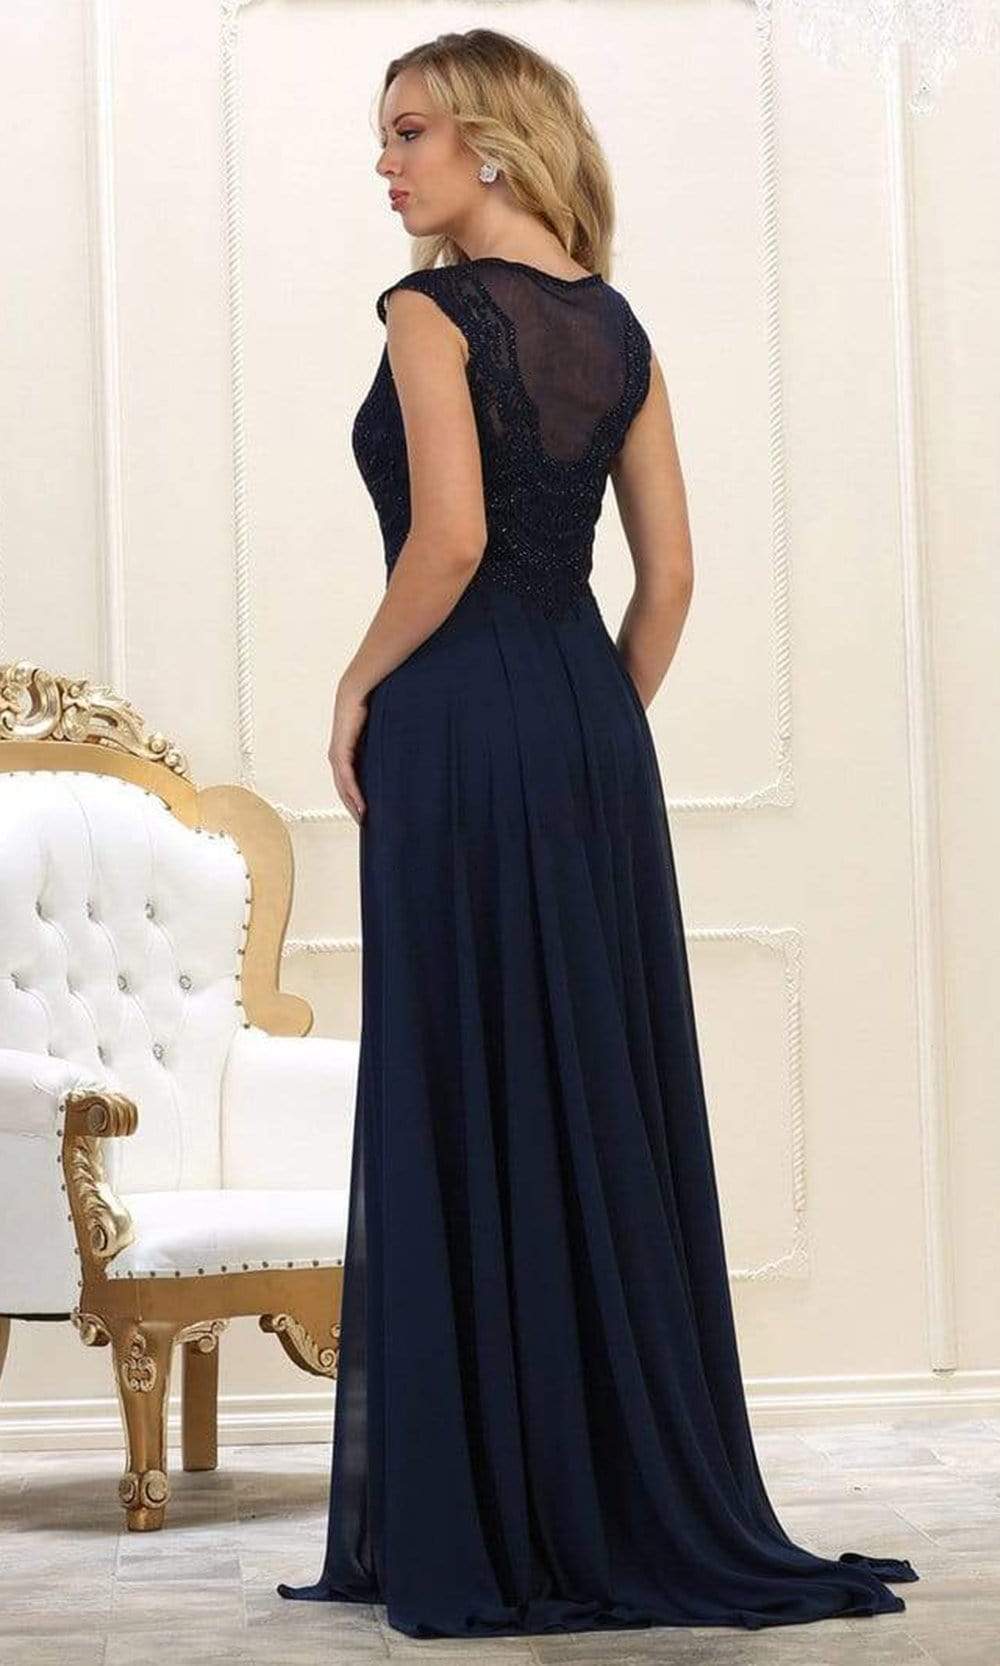 May Queen - MQ1563B Bateau A-Line Dress with Slit Mother of the Bride Dresses